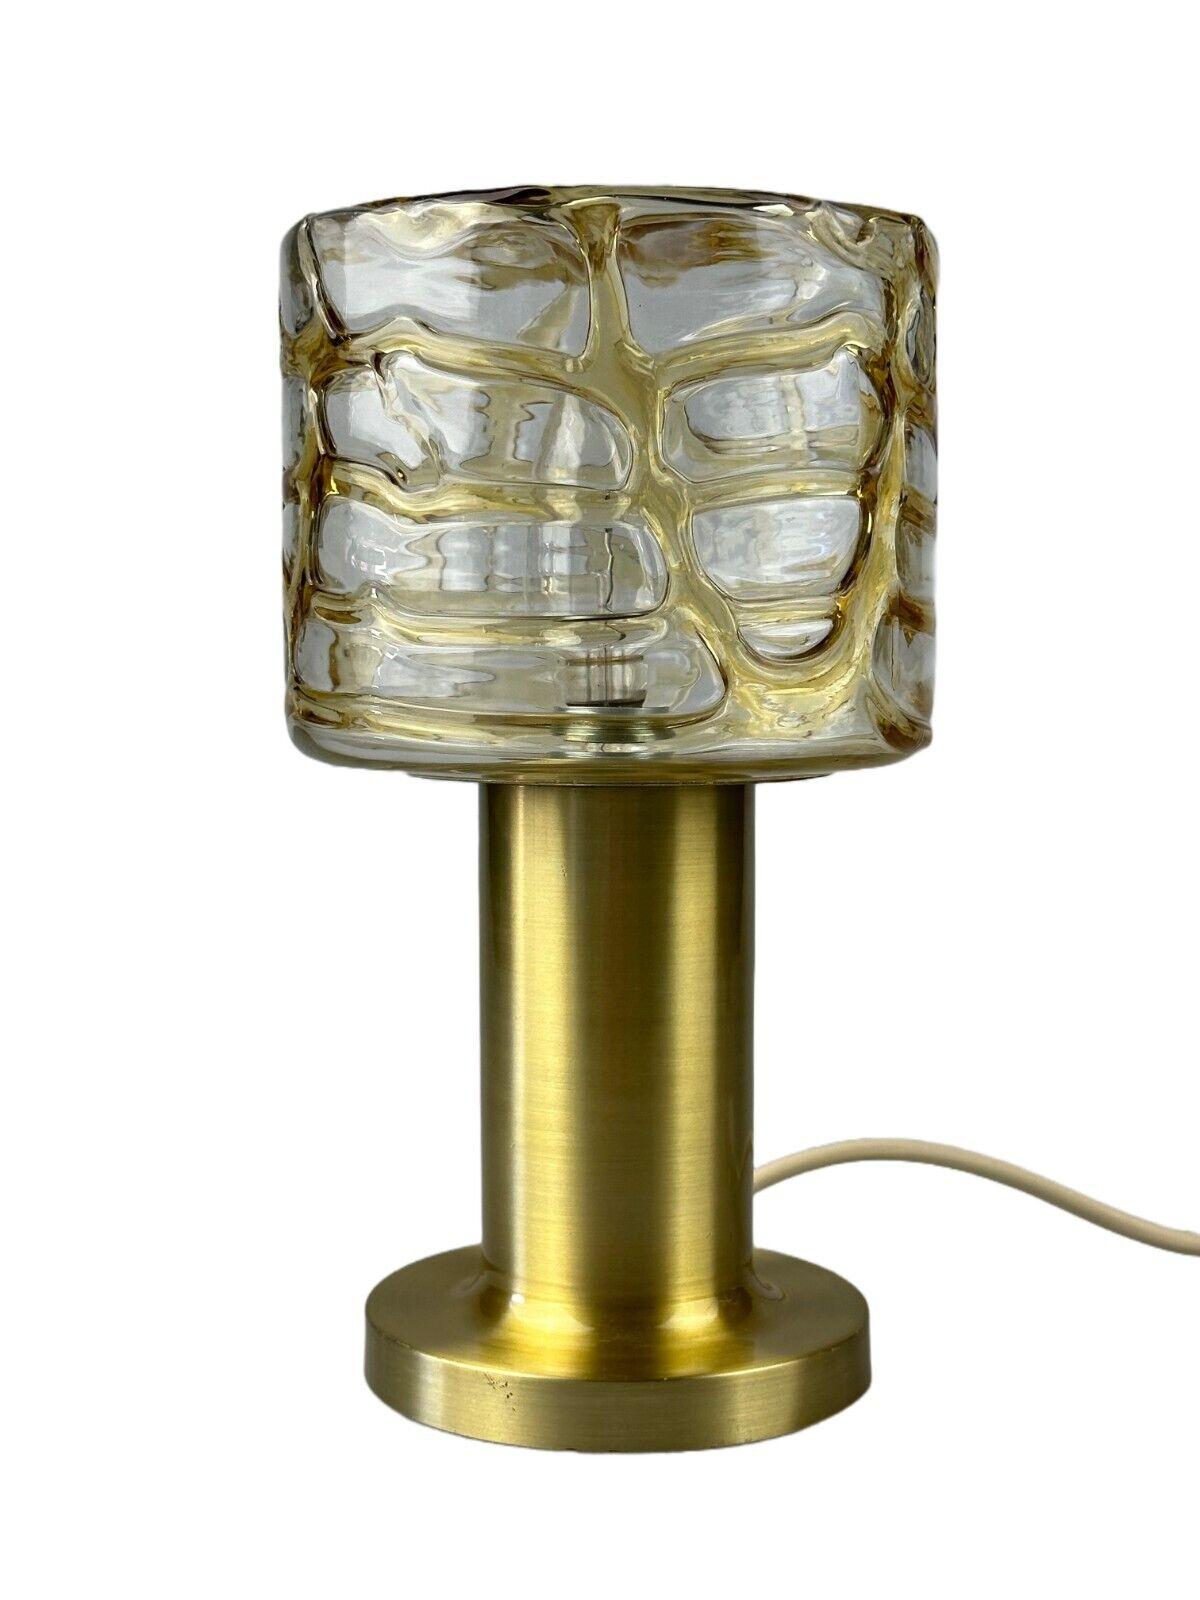 60s 70s table lamp bedside lamp brass Doria Leuchten Germany Design

Object: table lamp

Manufacturer: Doria

Condition: good

Age: around 1960-1970

Dimensions:

Diameter = 14.5cm
Height = 25.5cm

Material: glass, brass

Other notes:

E14